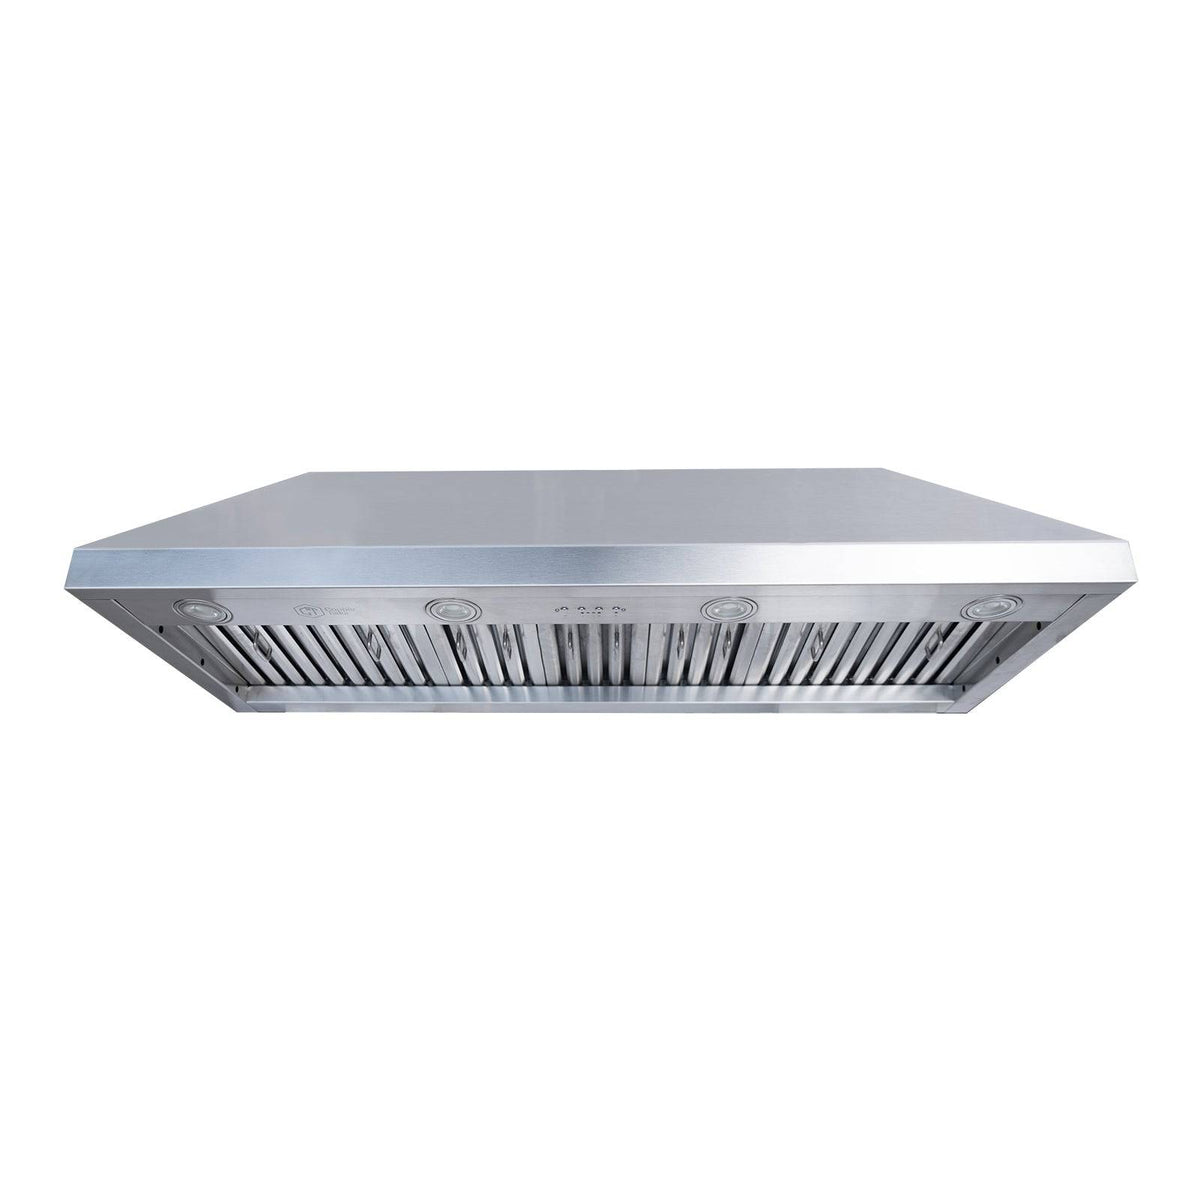 Fobest 42 inch 1150CFM Built-In Stainless Steel Range Hood Insert with LED lights (Free Expedited Shipping)-F0142